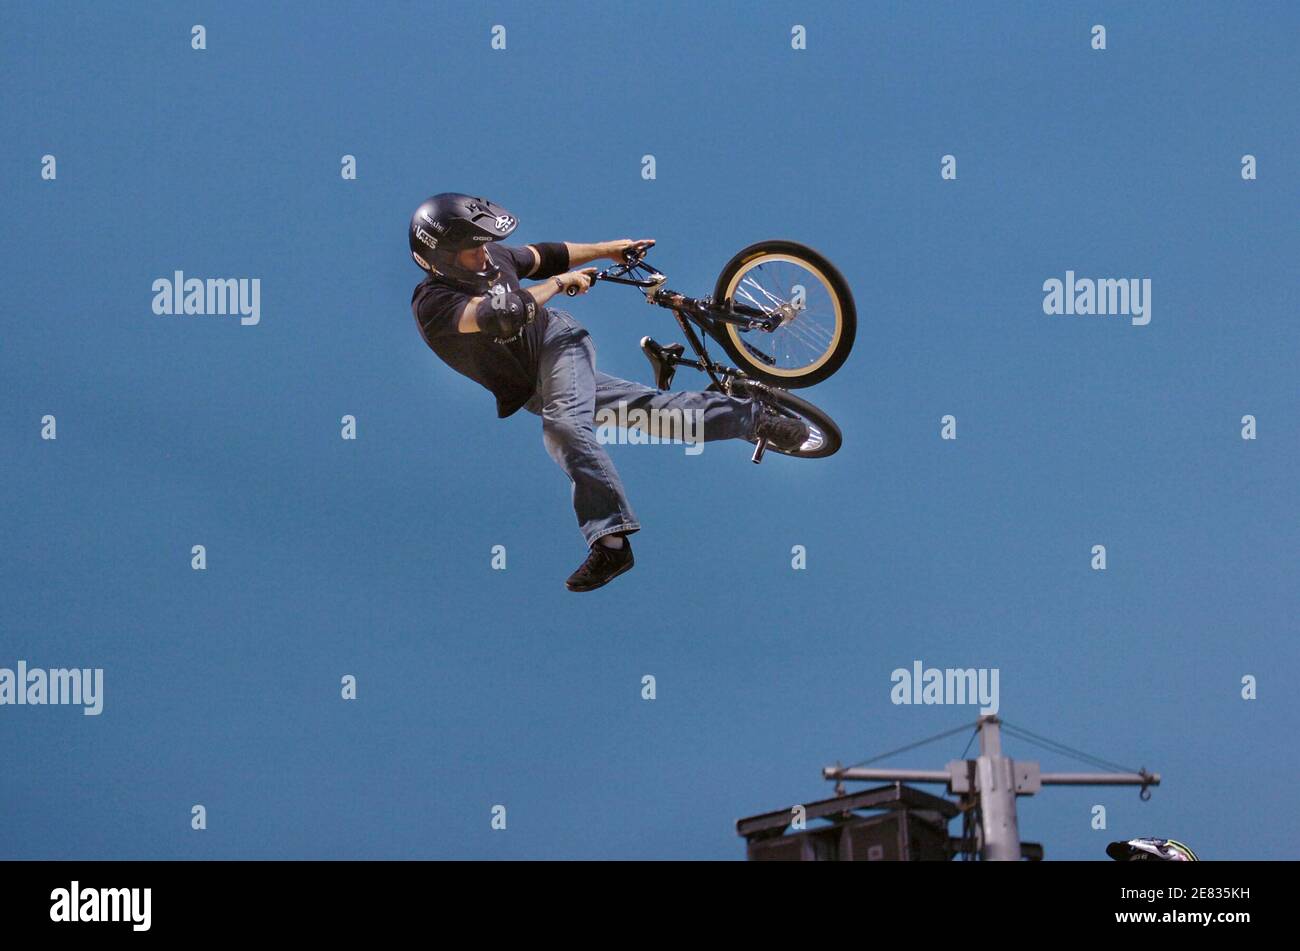 Dennis McCoy of Kansas City, MO competes in the BMX vert finals competition  at the AST Dew Adventure Sports Tour held at the Camden Yards sports  complex in Baltimore, MD, USA on